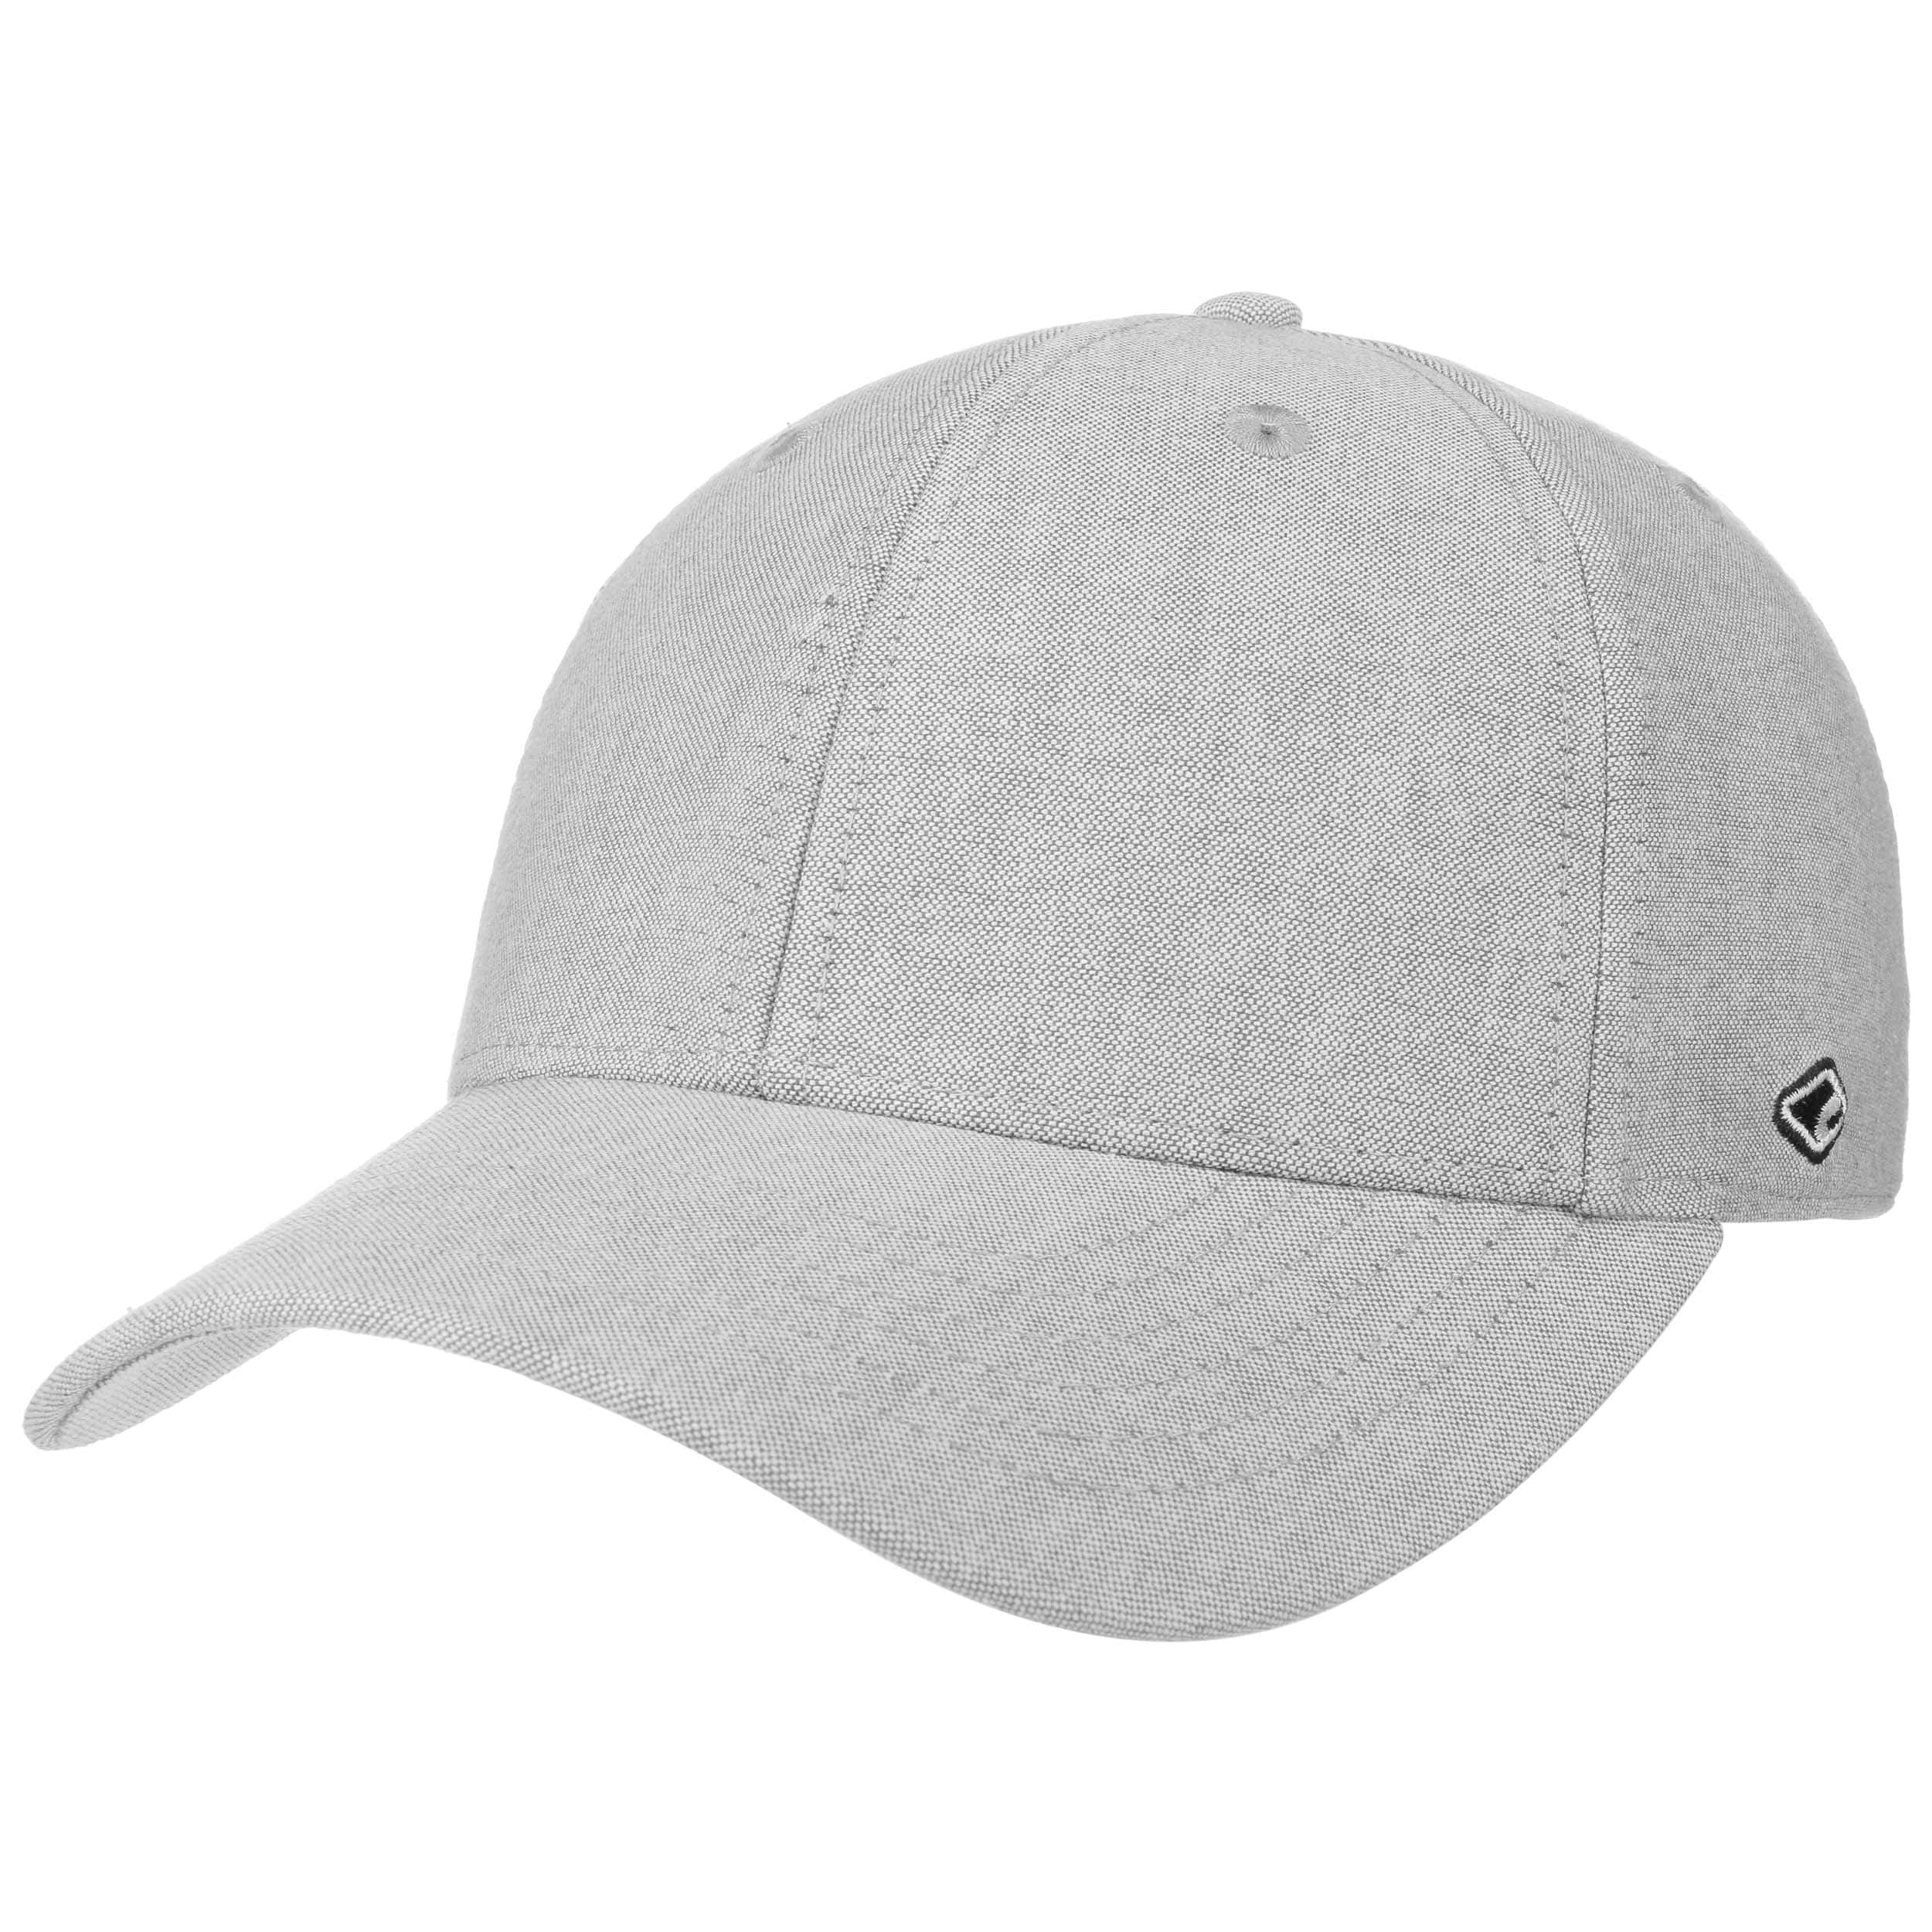 Teran Cap by Chillouts - 19,95 €